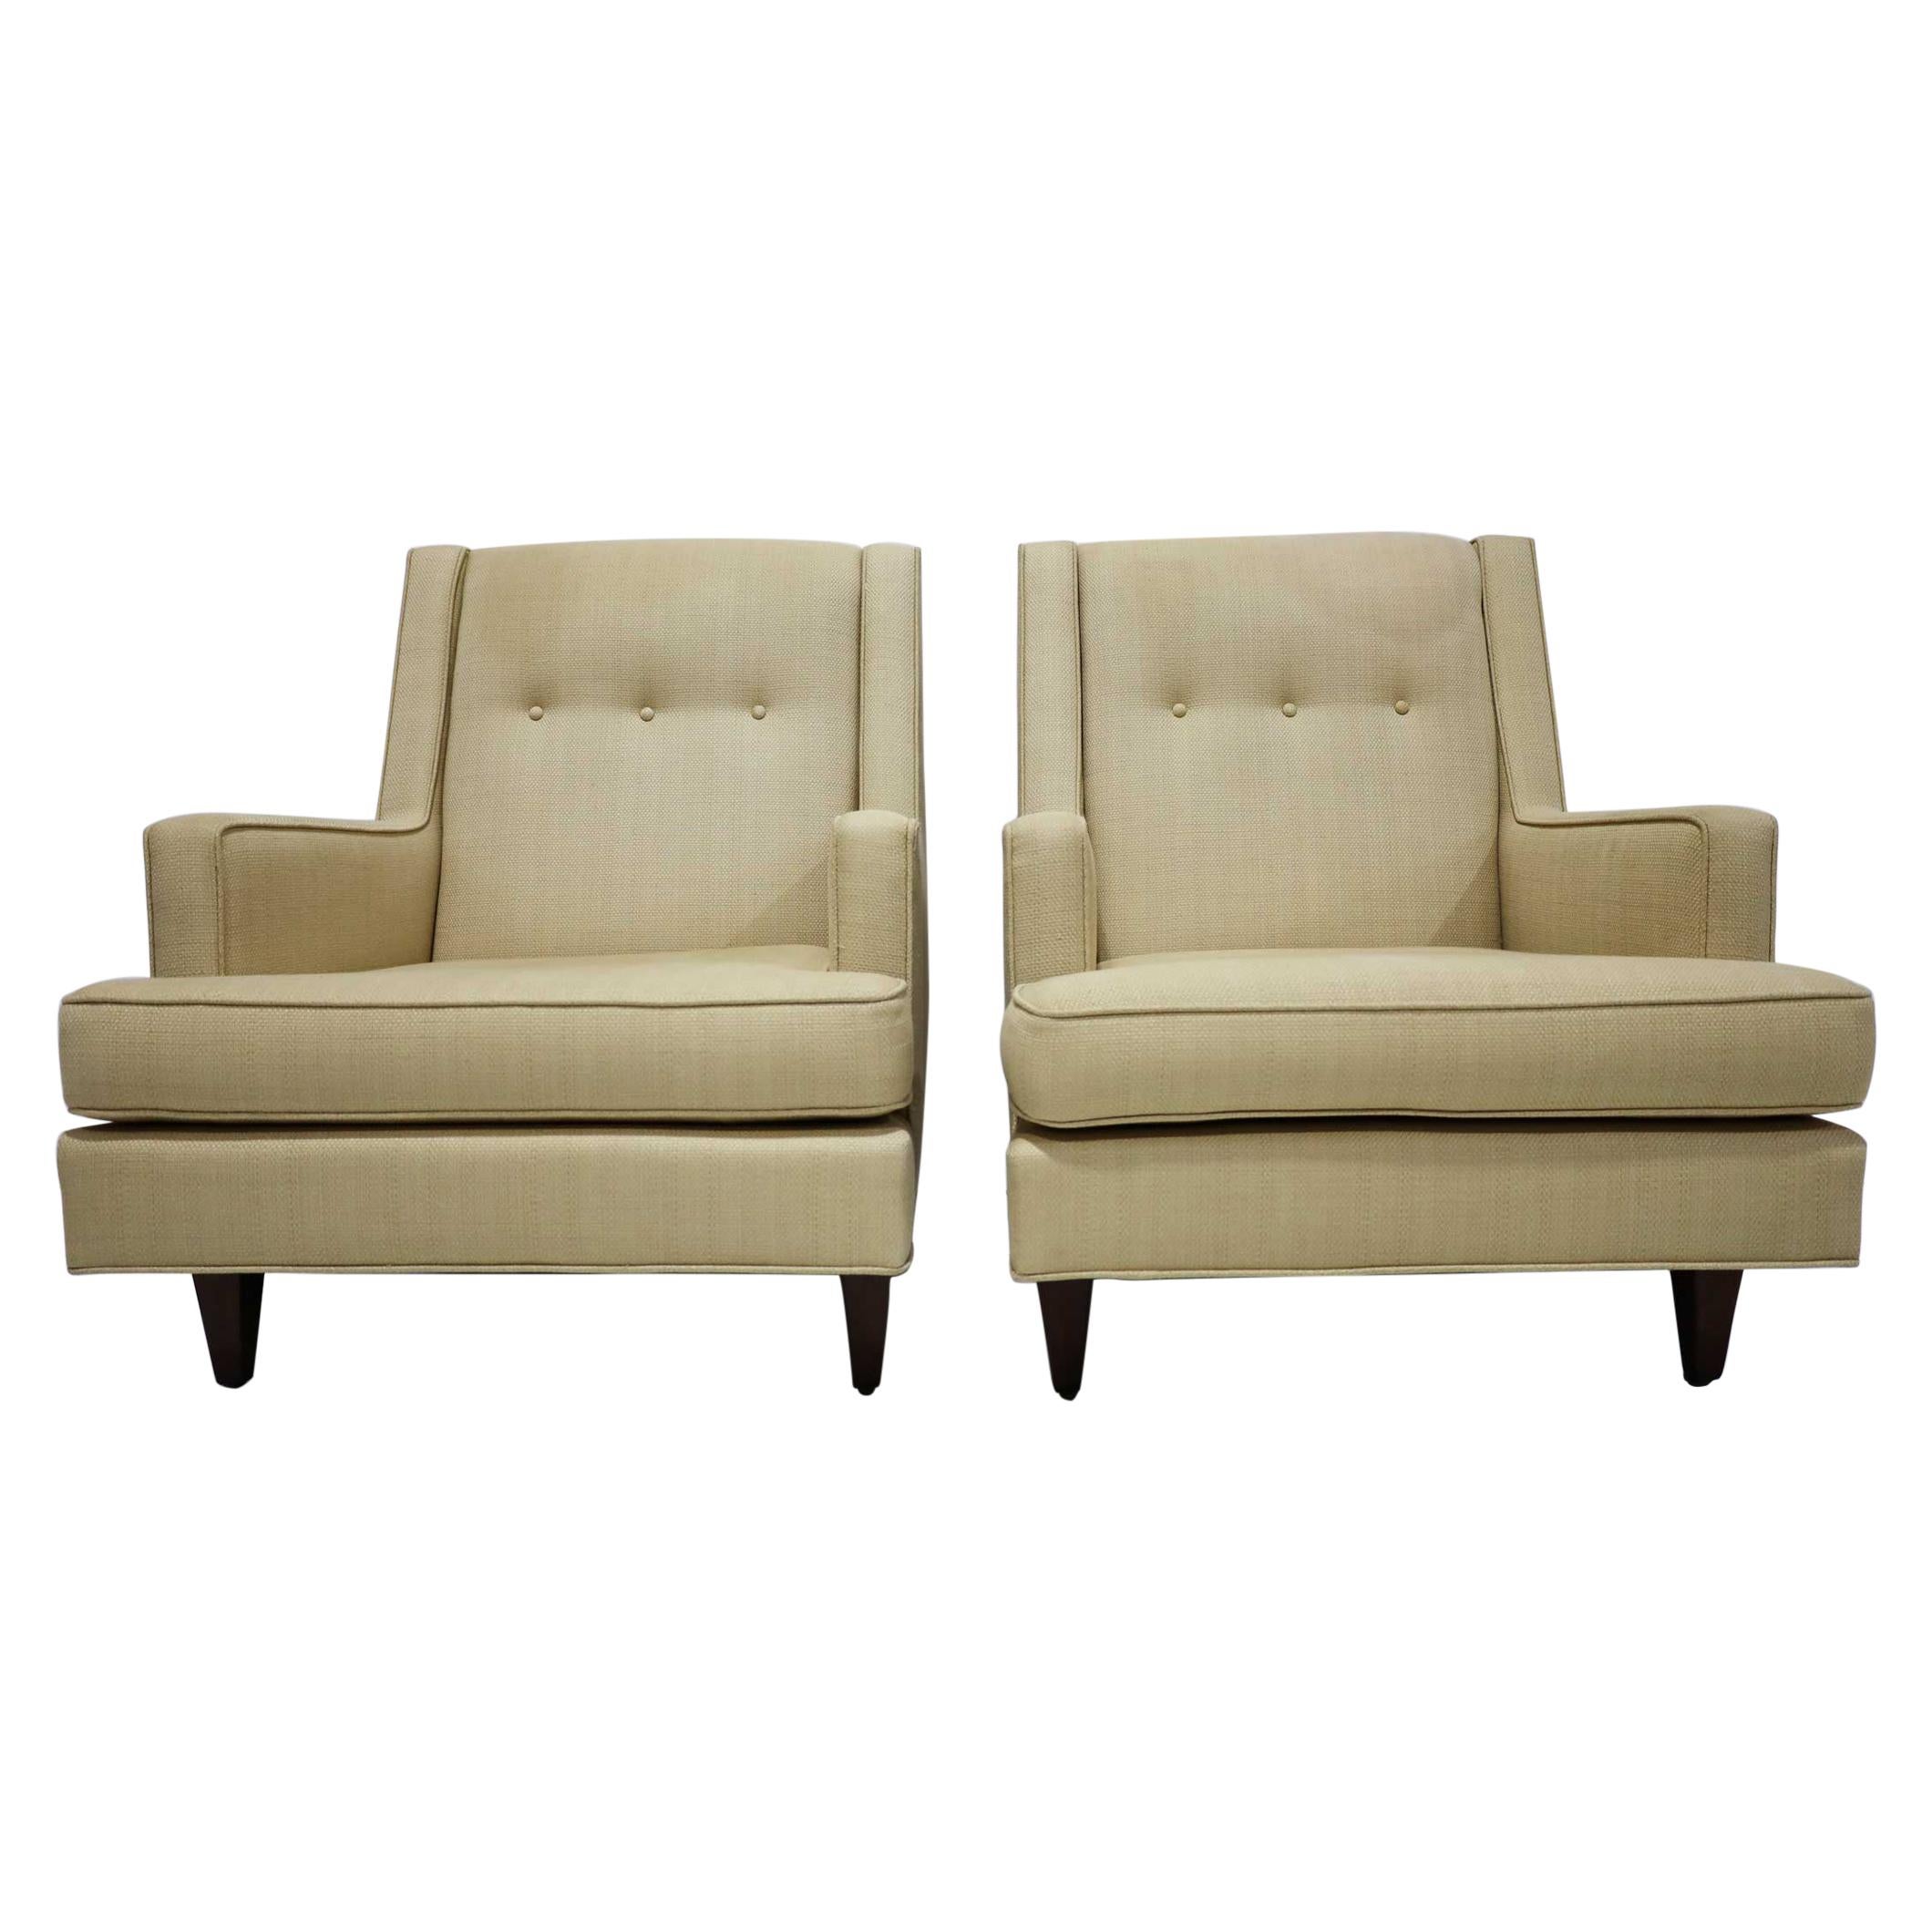 Pair of Dunbar High Back "Mr." Lounge Chairs by Edward Wormley